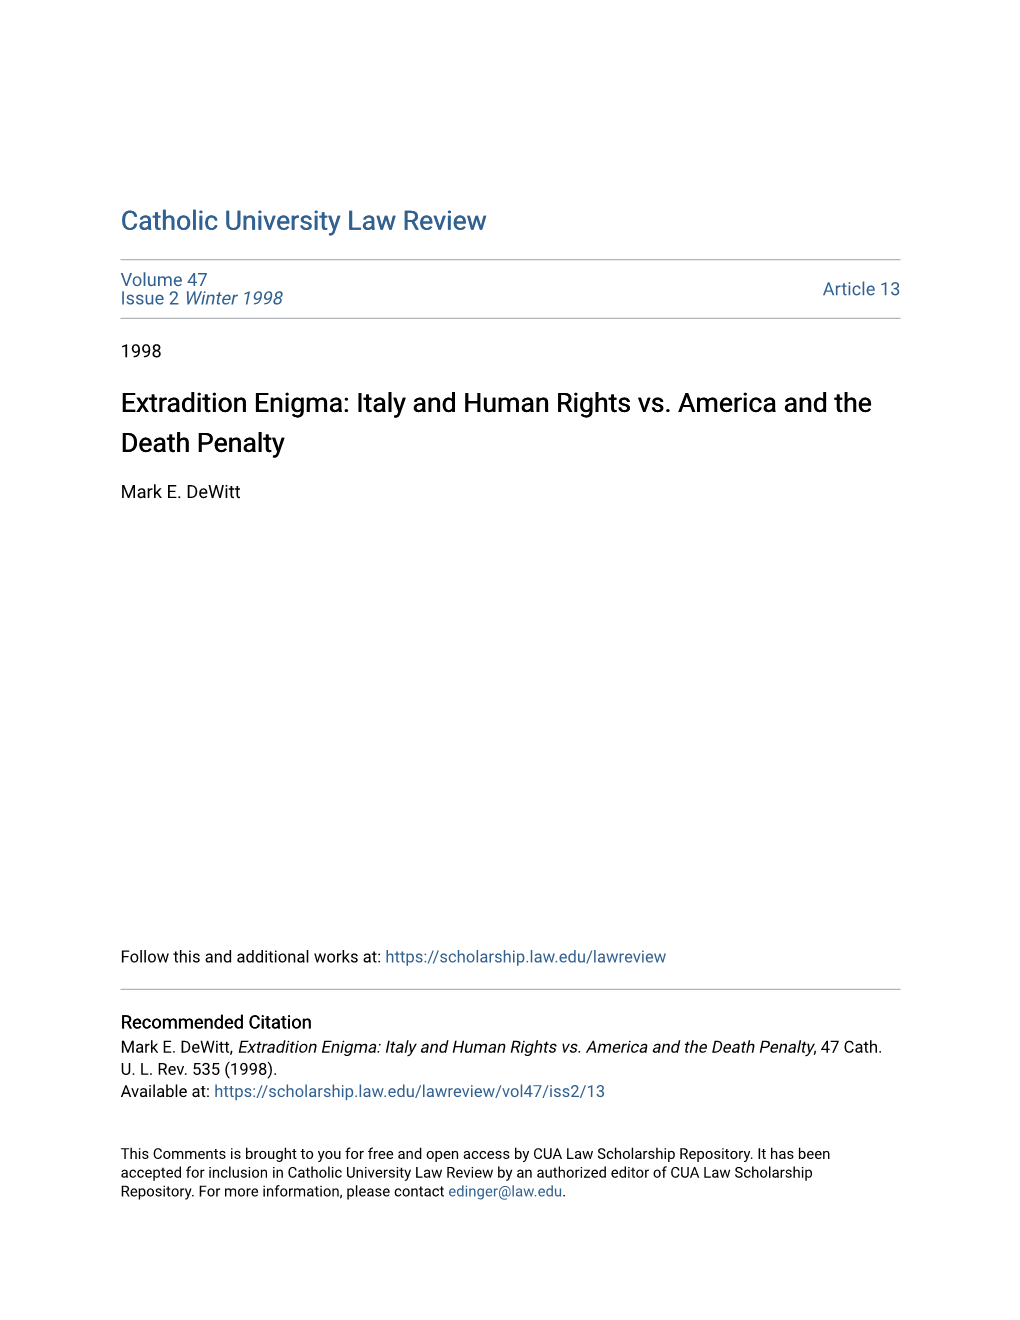 Extradition Enigma: Italy and Human Rights Vs